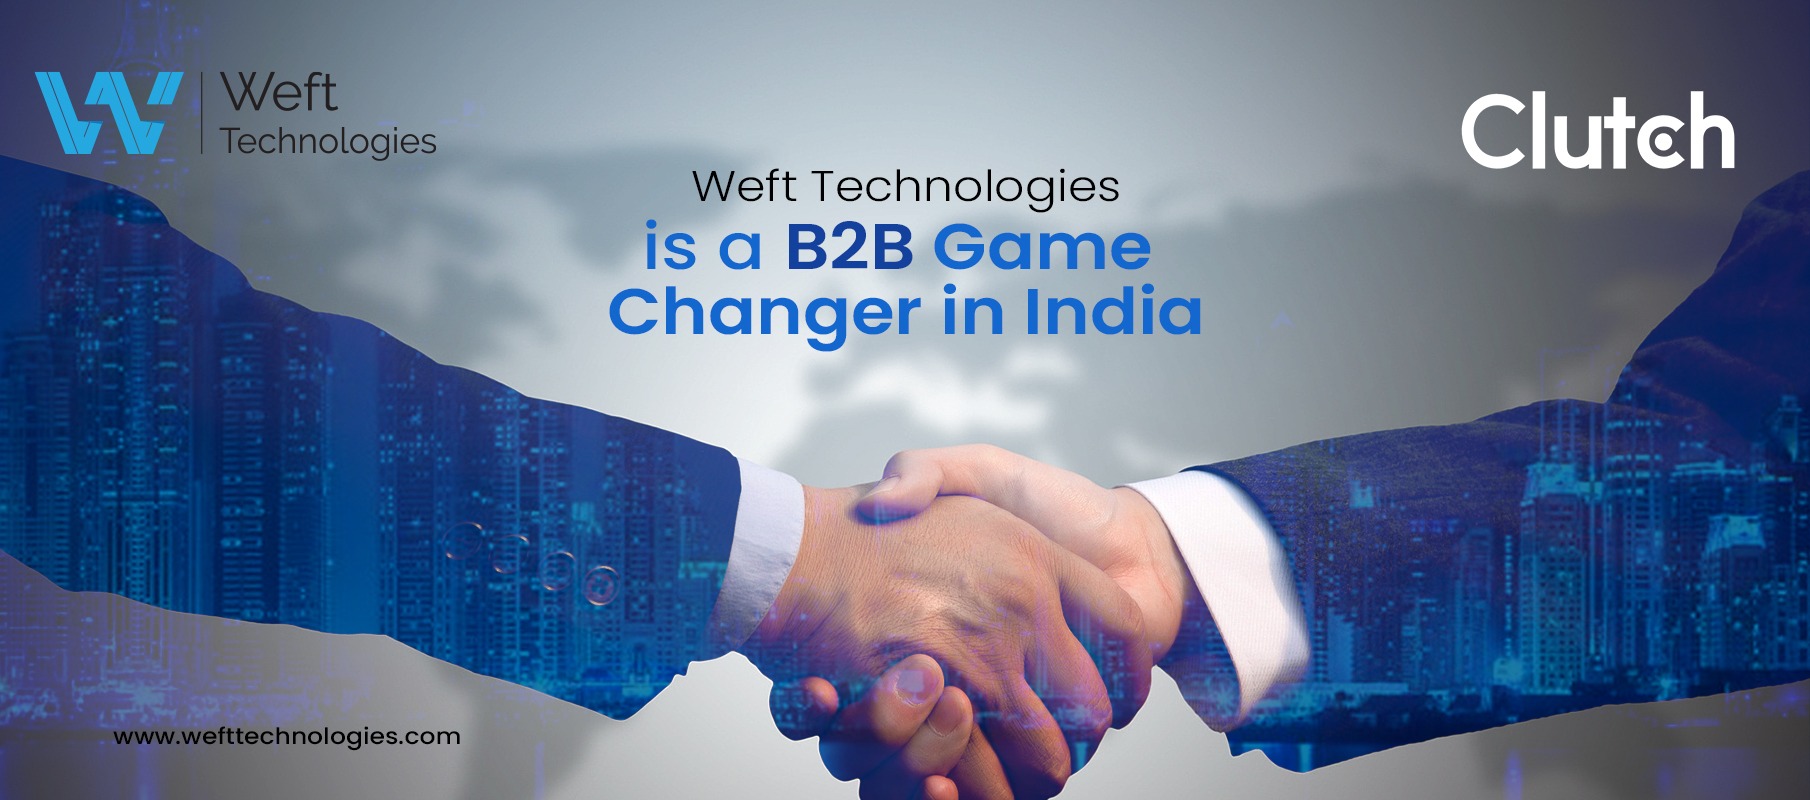 Weft Technologies is a B2B Game Changer in India